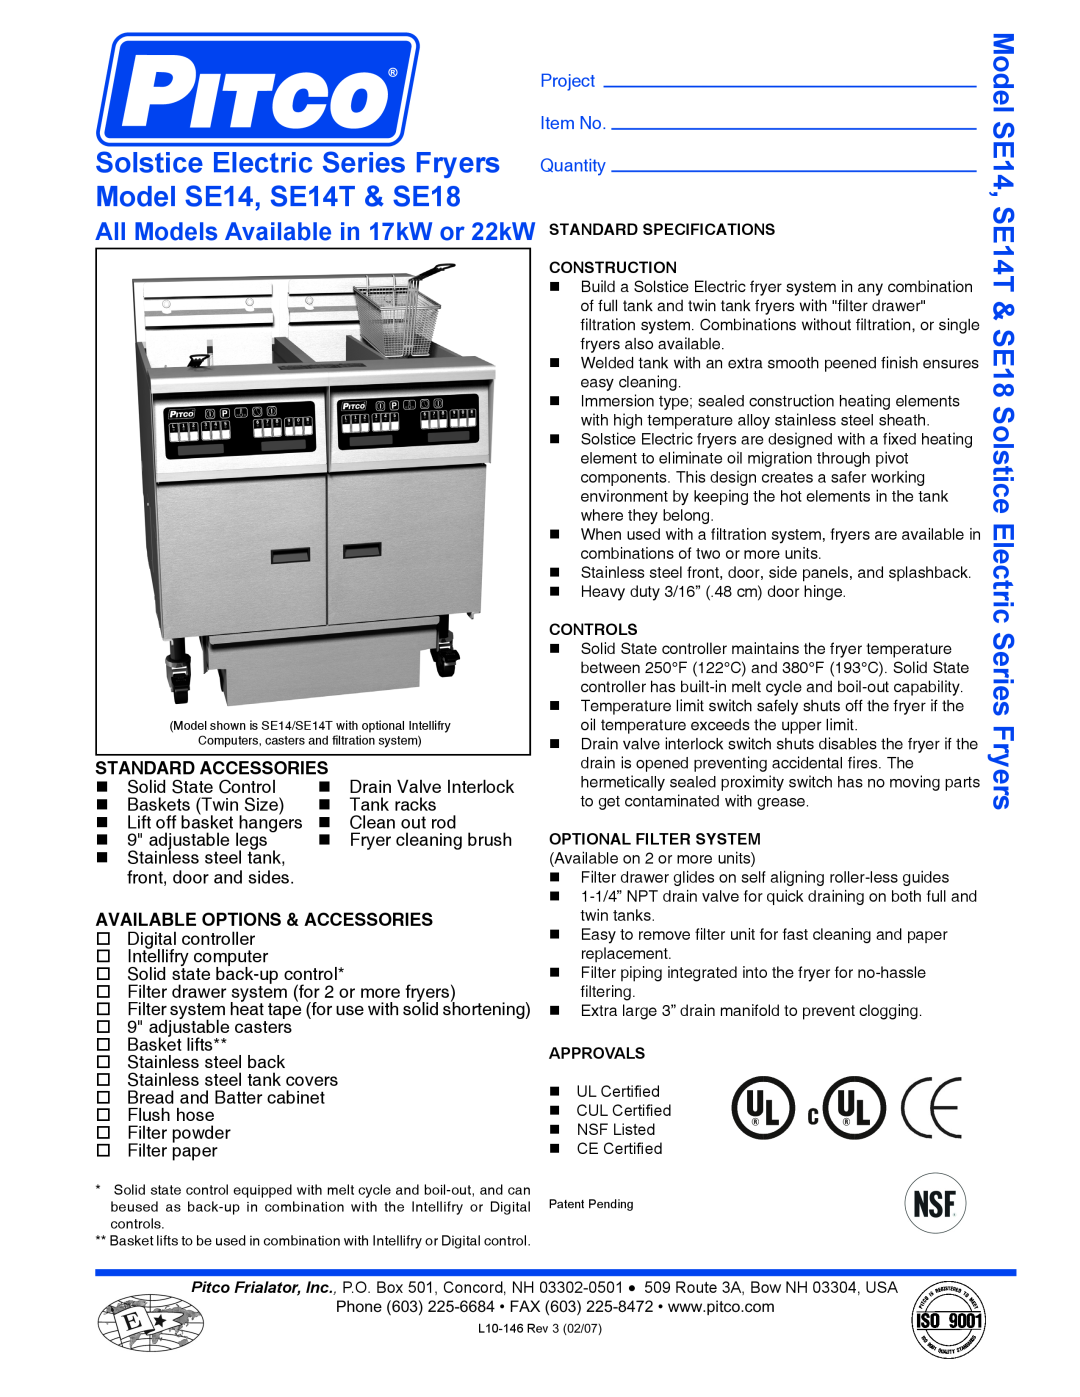 Pitco Frialator specifications Solstice Electric Series Fryers Quantity, Model SE14, SE14T & SE18, Project Item No 